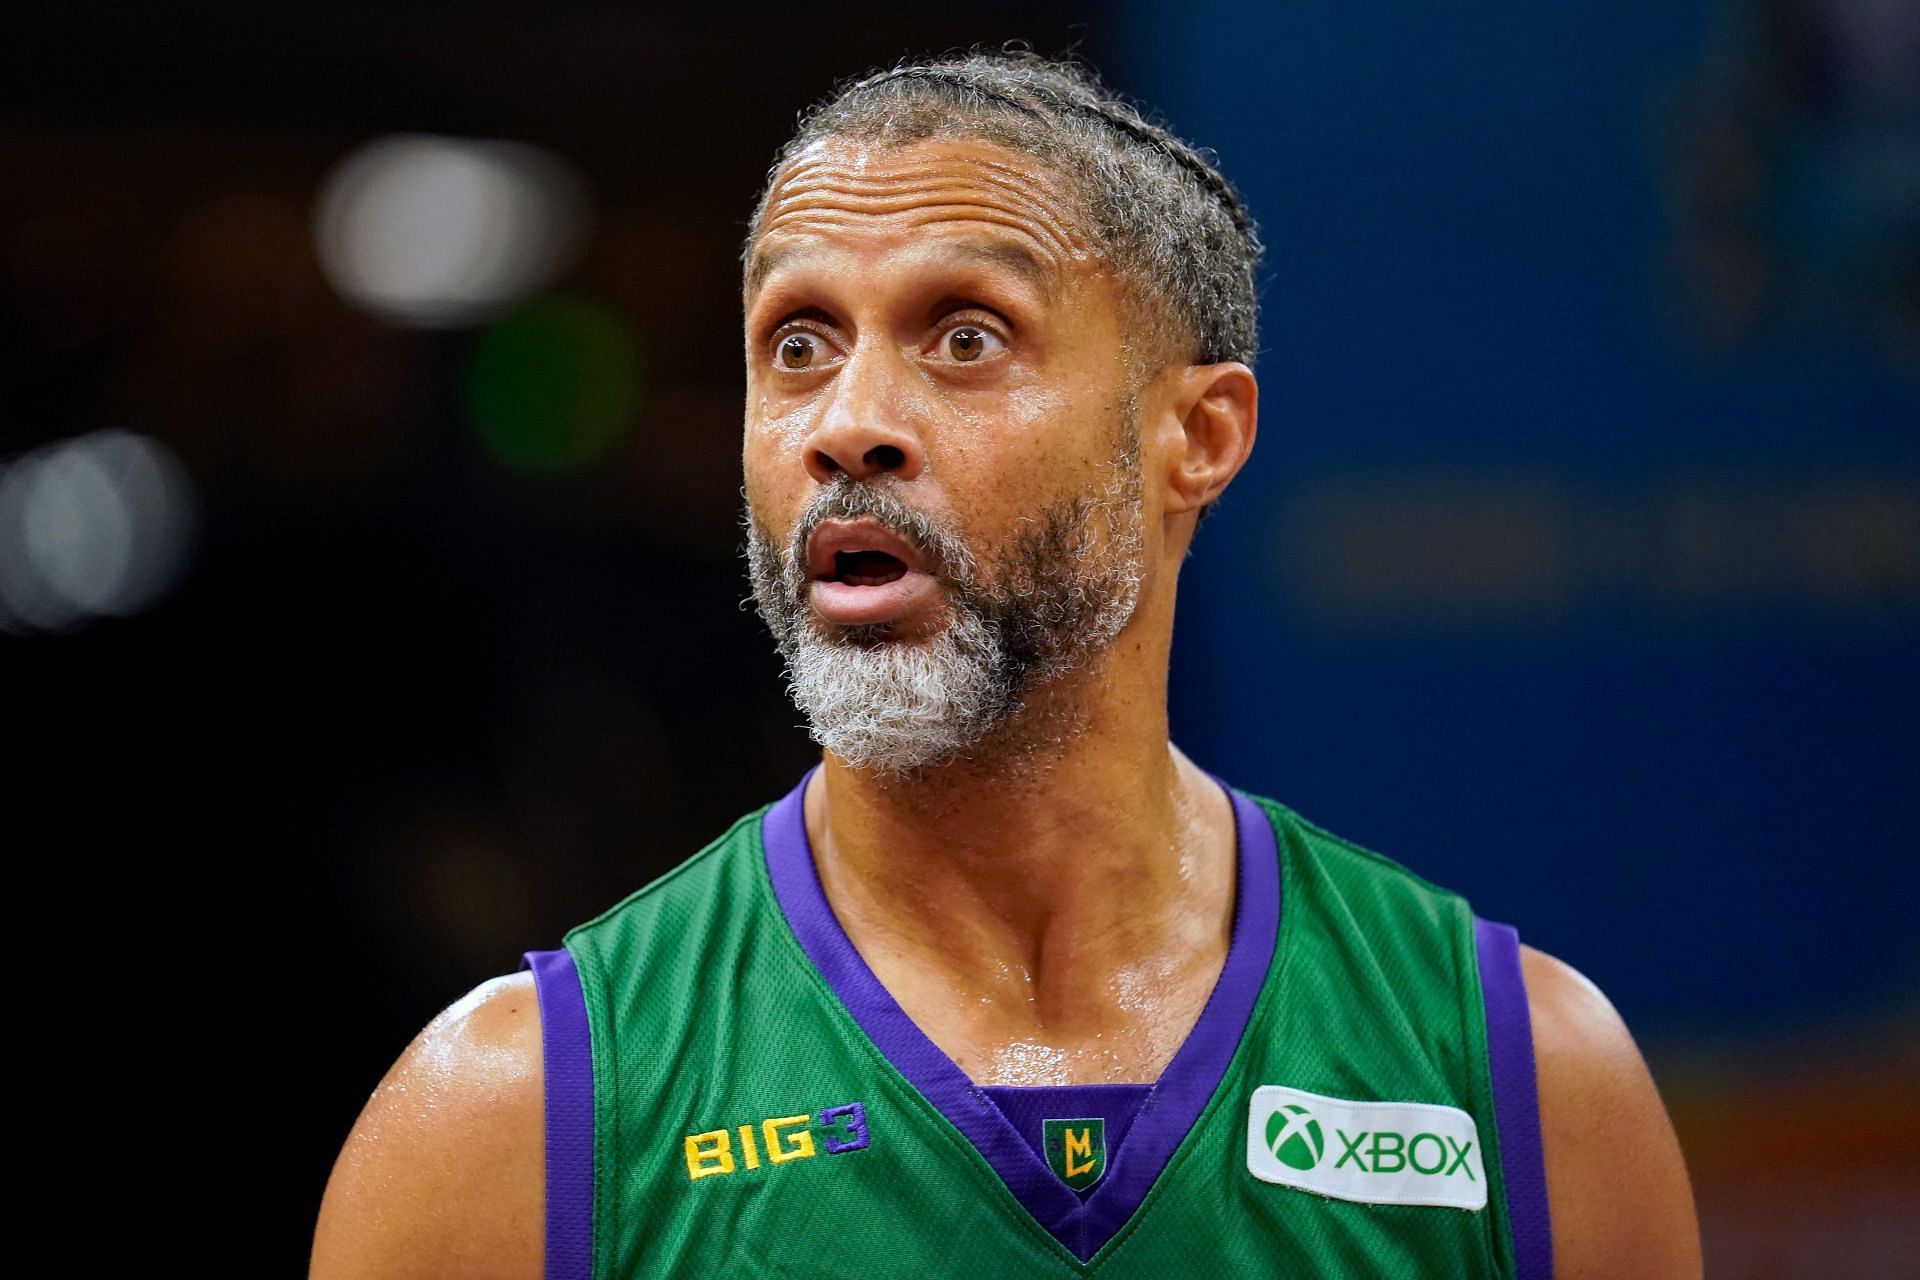 Ex-NBA star Mahmoud Abdul-Rauf 'Could Care Less' About Getting An